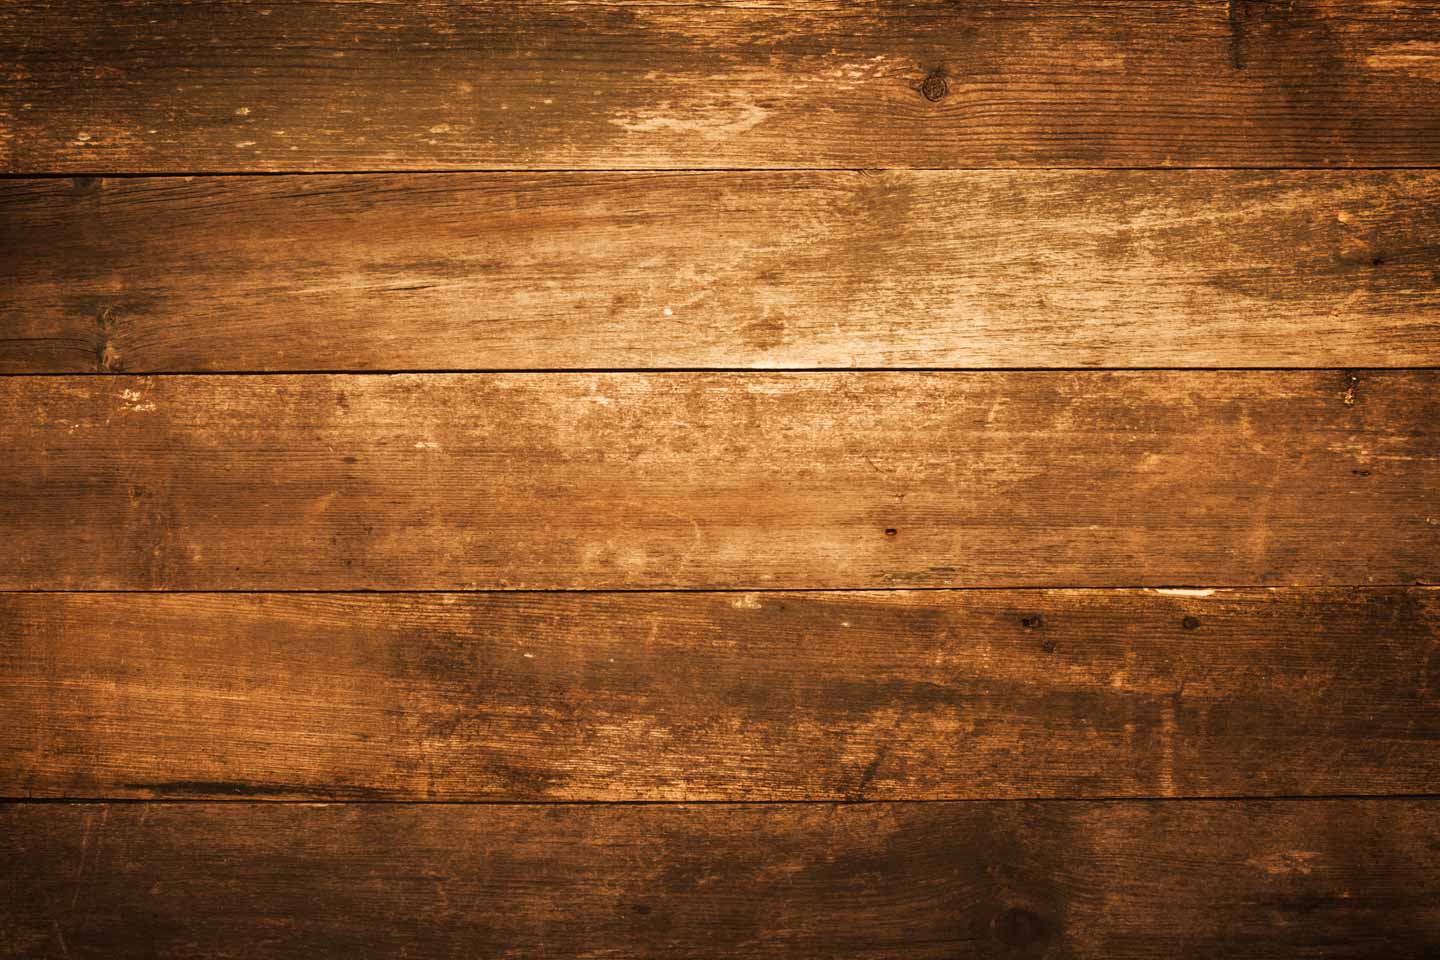 Wood PNG Transparent Background, Free Download #31754 - FreeIconsPNG